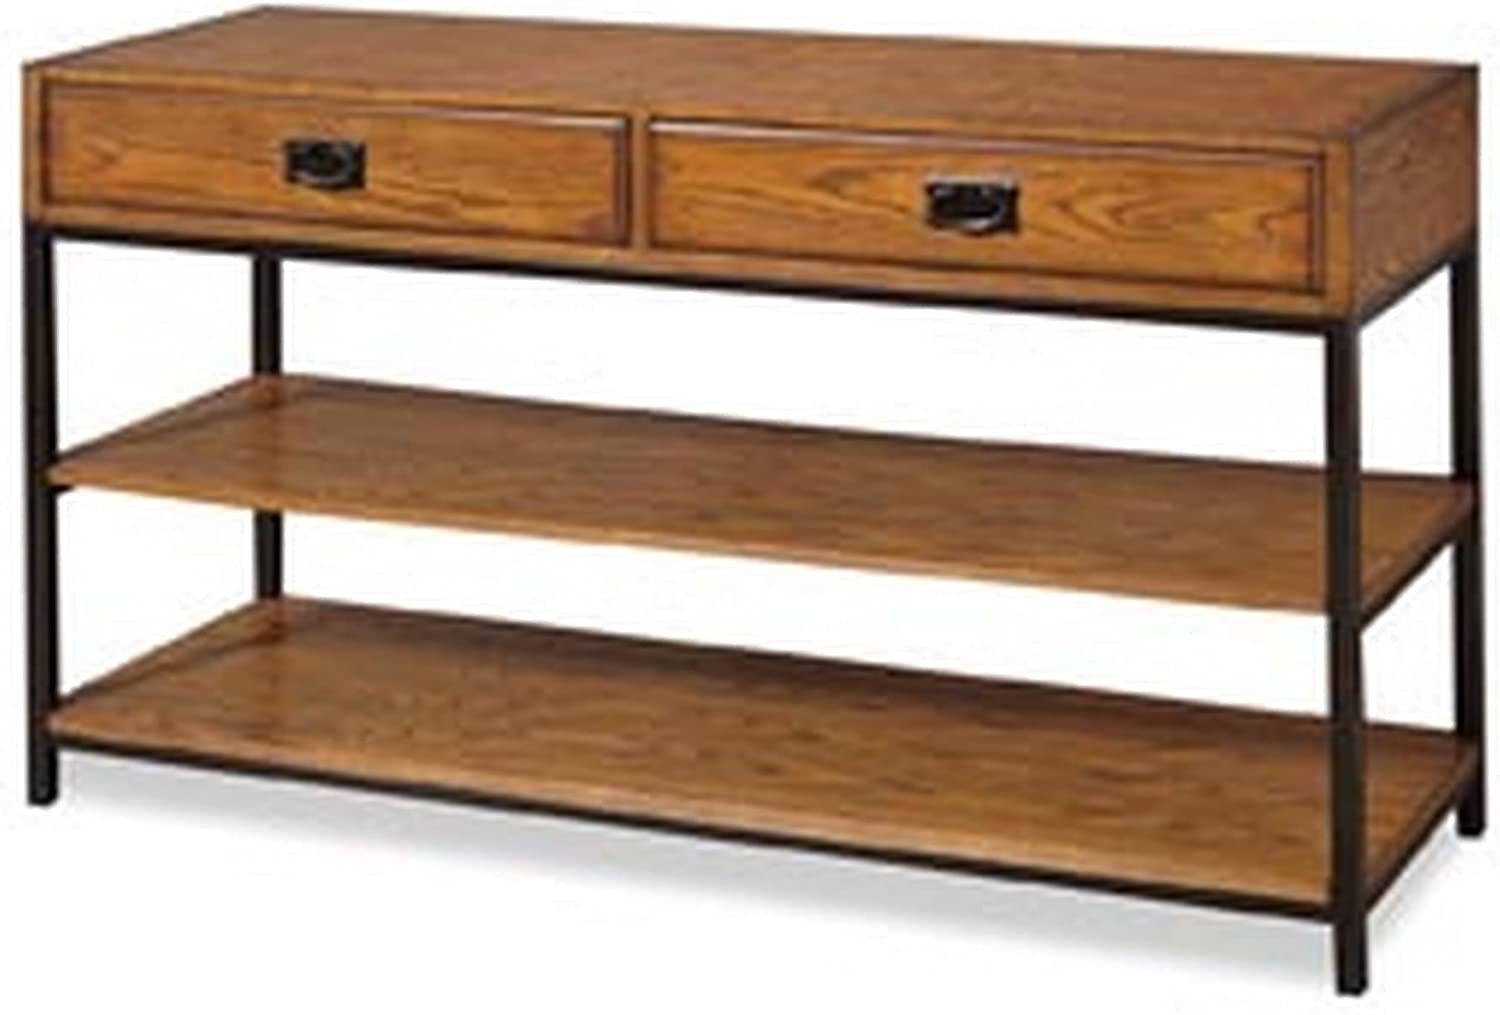 Media Console By Home Styles In Modern Craftsman Distressed Oak. - $357.99